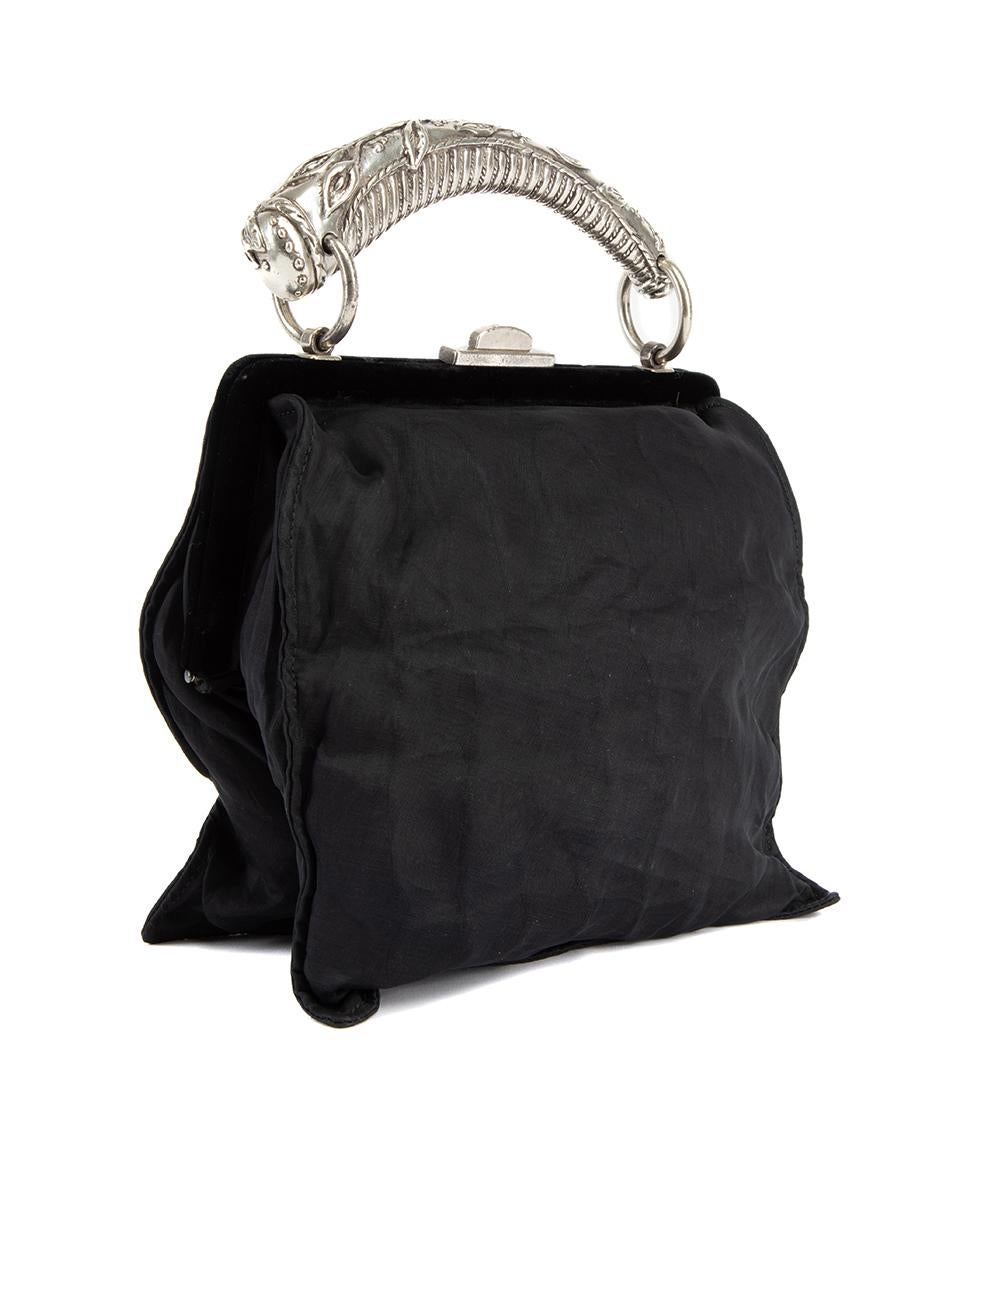 CONDITION is Very good. Hardly any visible wear to bag is evident. Minor tarnishing to silver tone top handle and clasp can be seen on this used Yves Saint Laurent Rive Gauche designer resale item. This item comes with original dustbag. Details